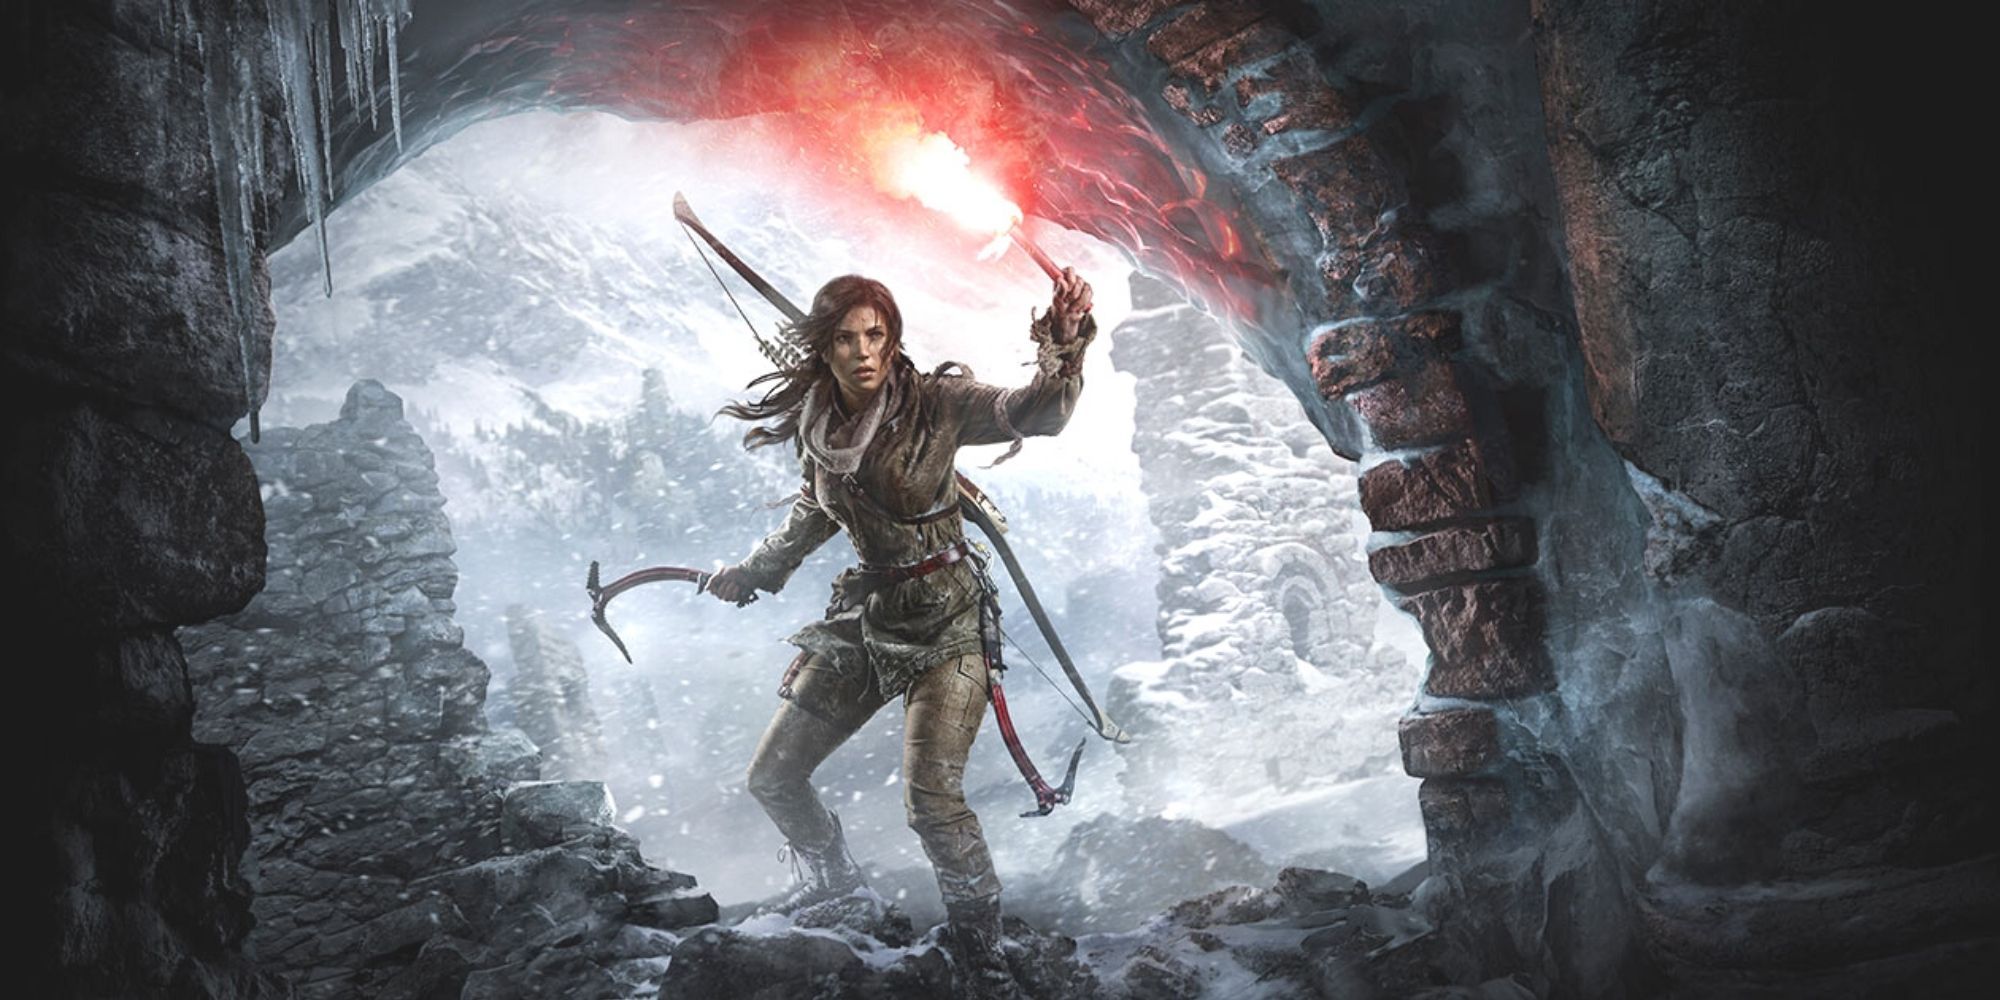 Lara Croft entering a cave From The Cold in Rise Of The Tomb Raider